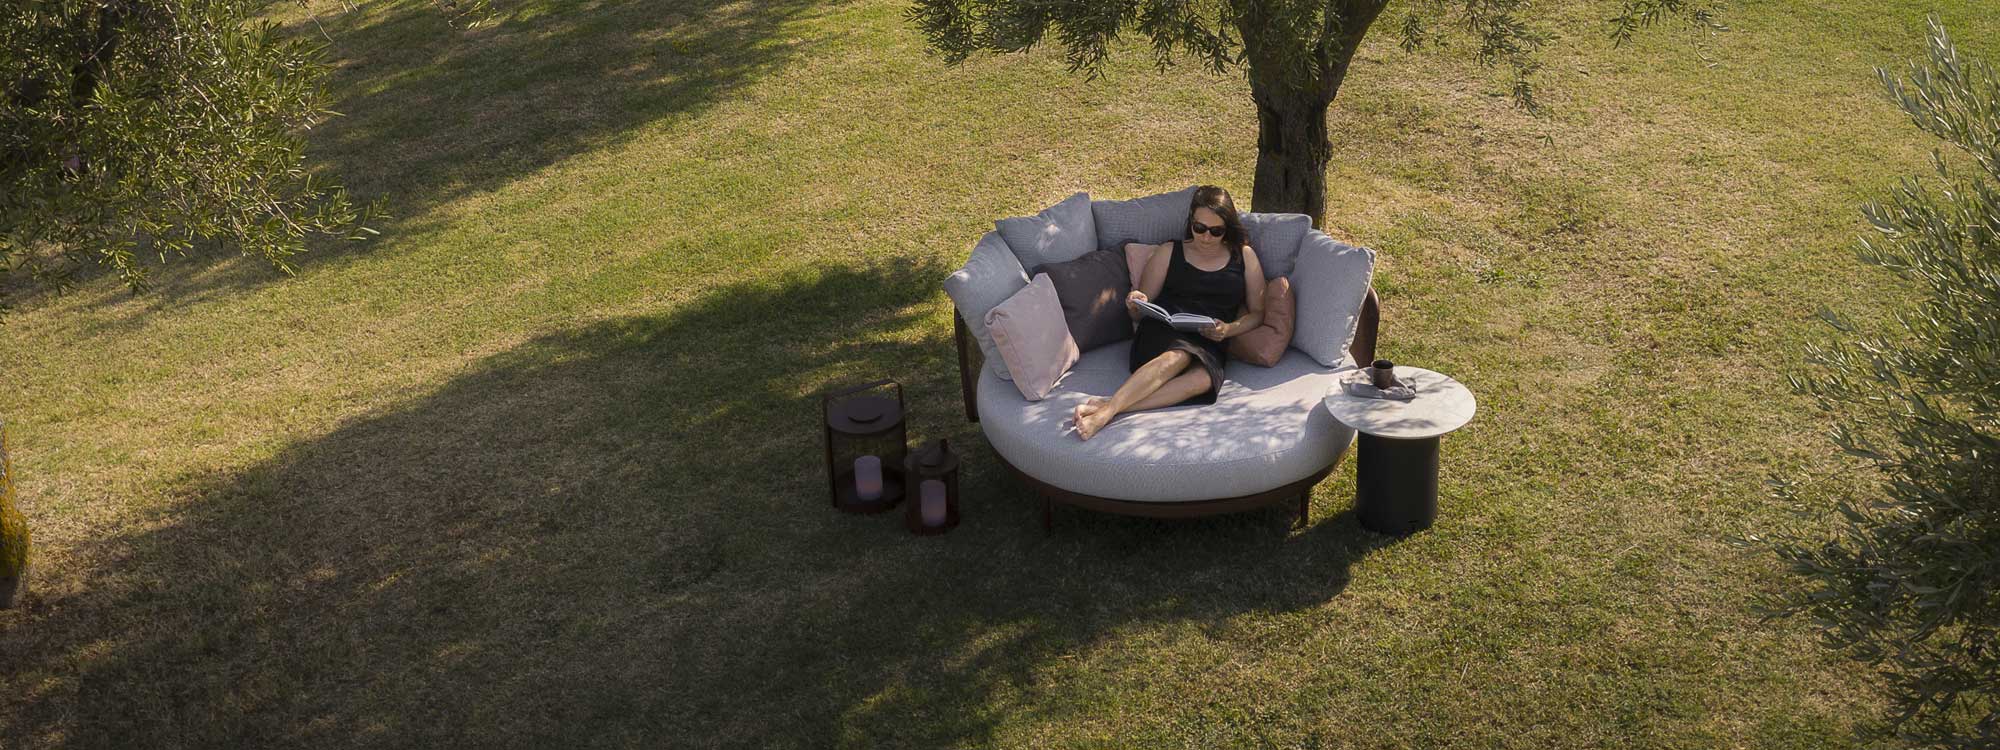 Image of woman relaxing on Baza luxury garden daybed beneath shade of tree